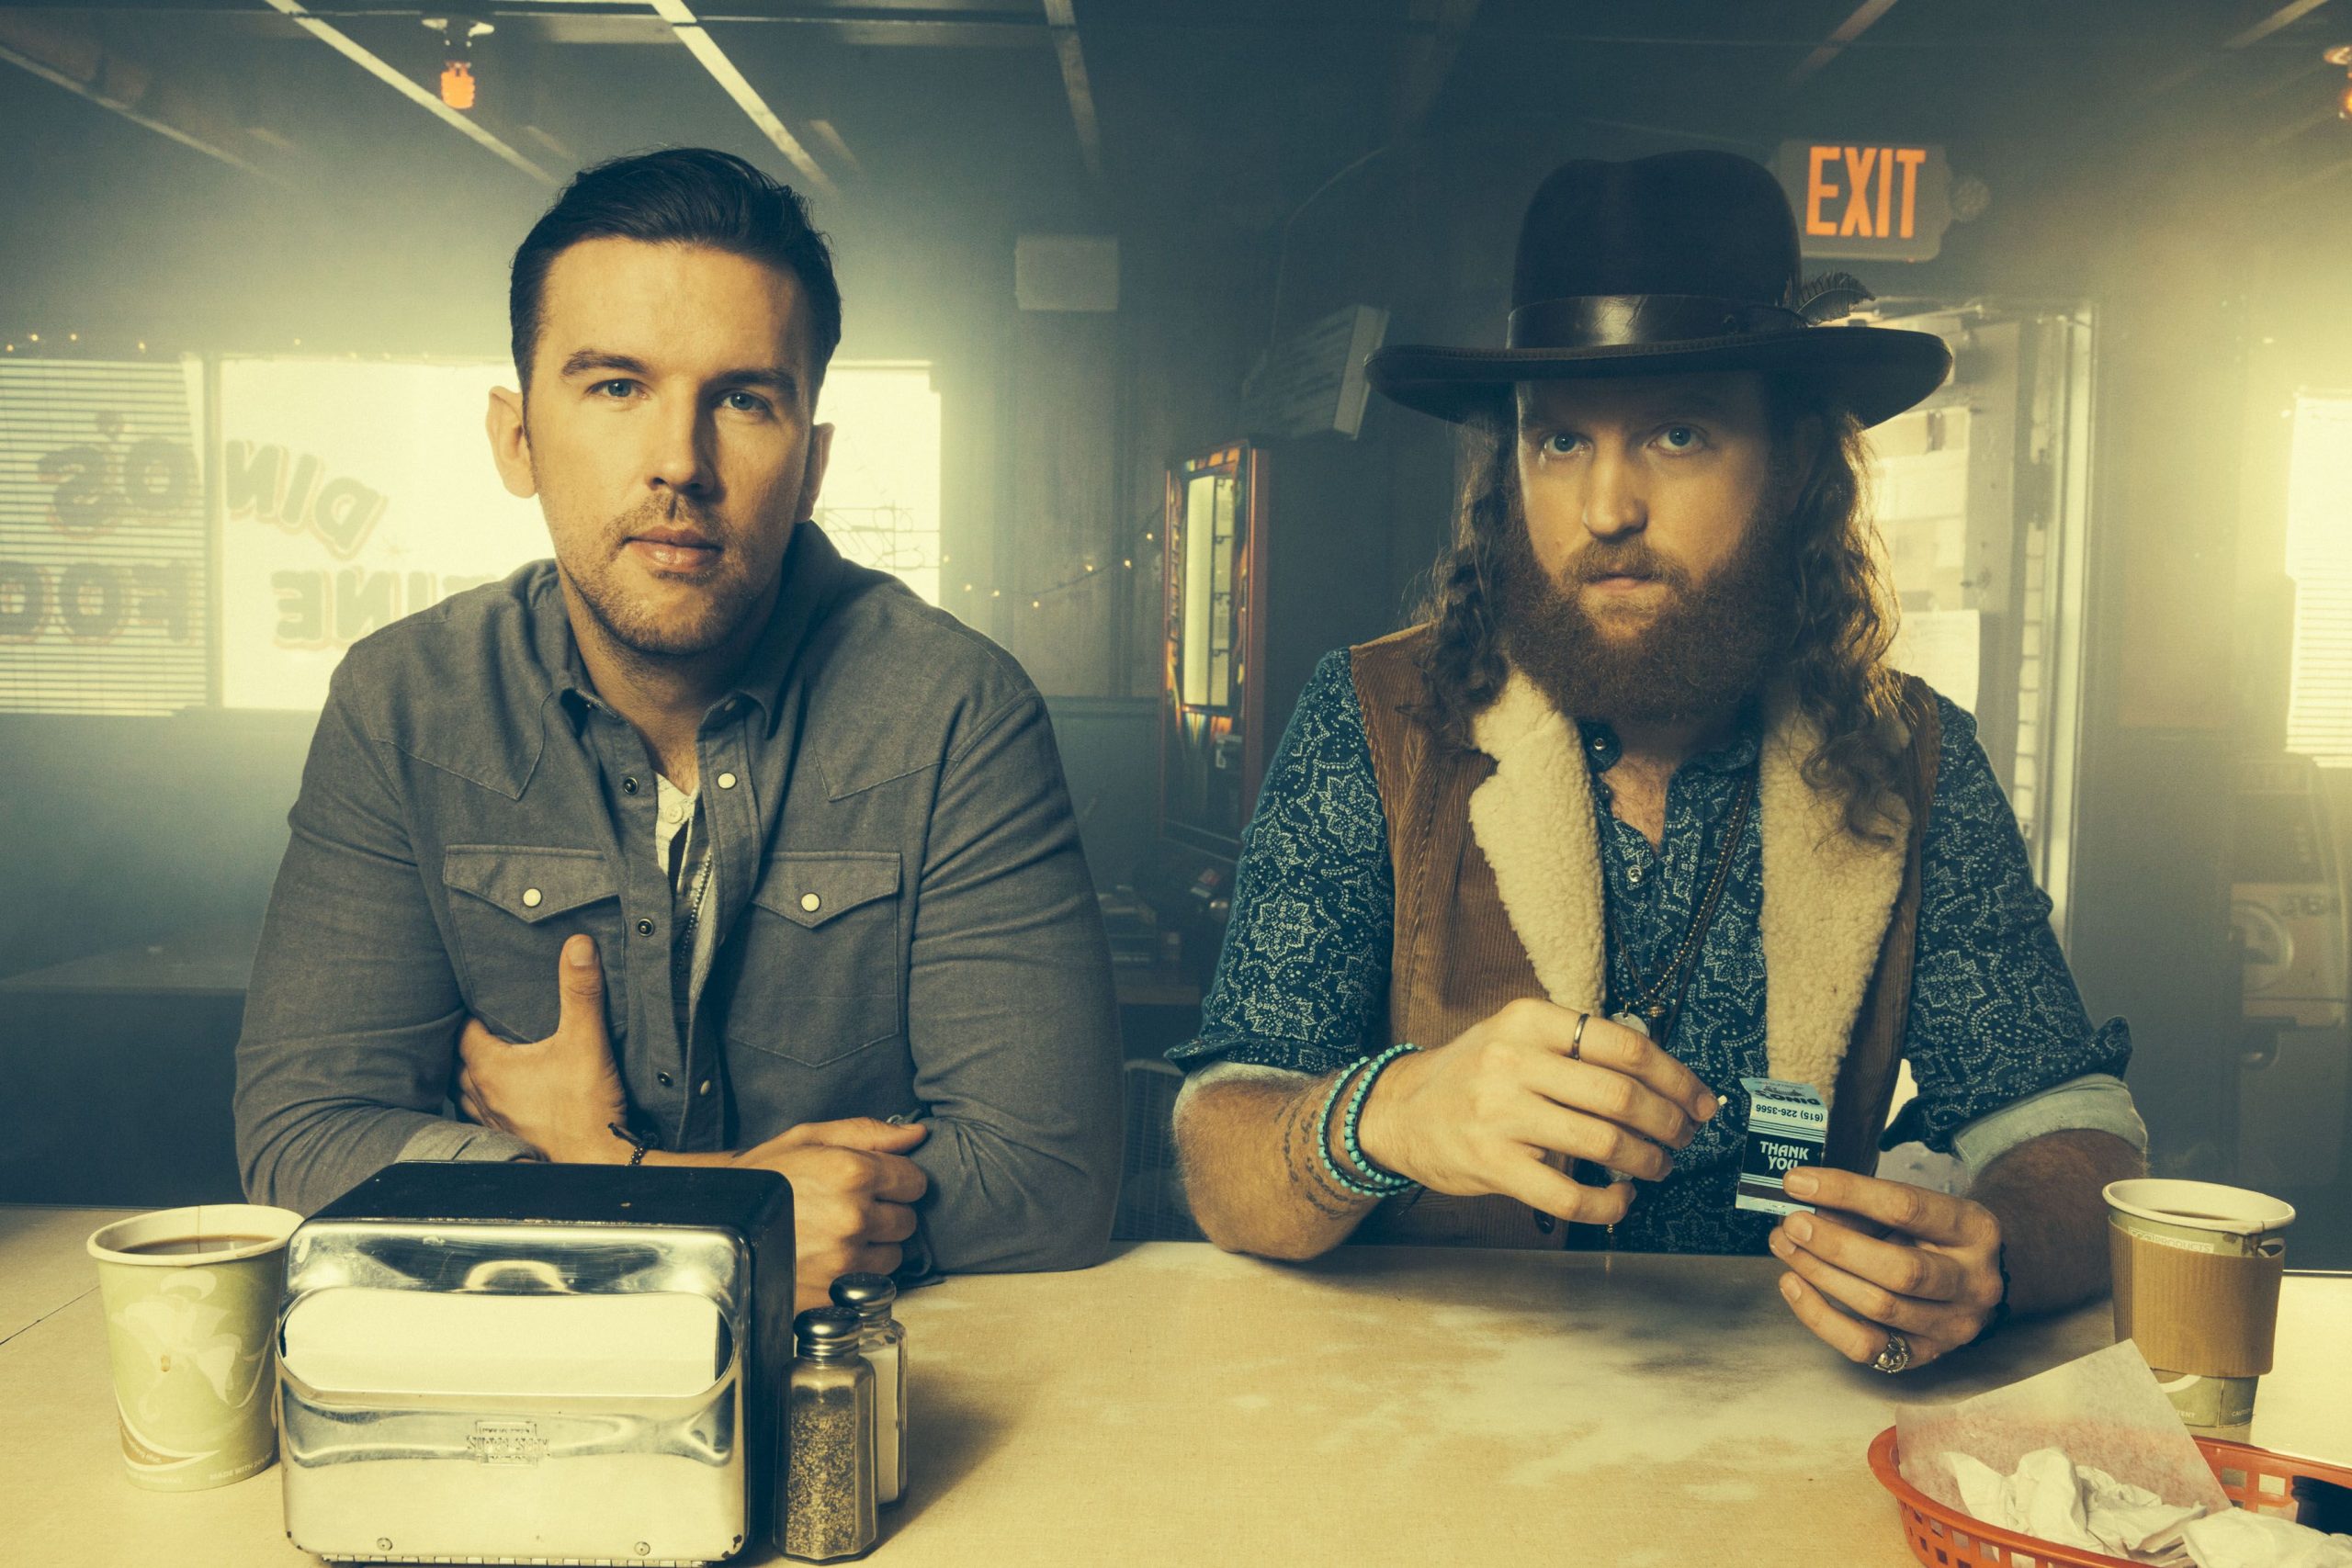 BROTHERS OSBORNE NO.1 MOST ADDED AT COUNTRY RADIO WITH NEW SINGLE “21 SUMMER”